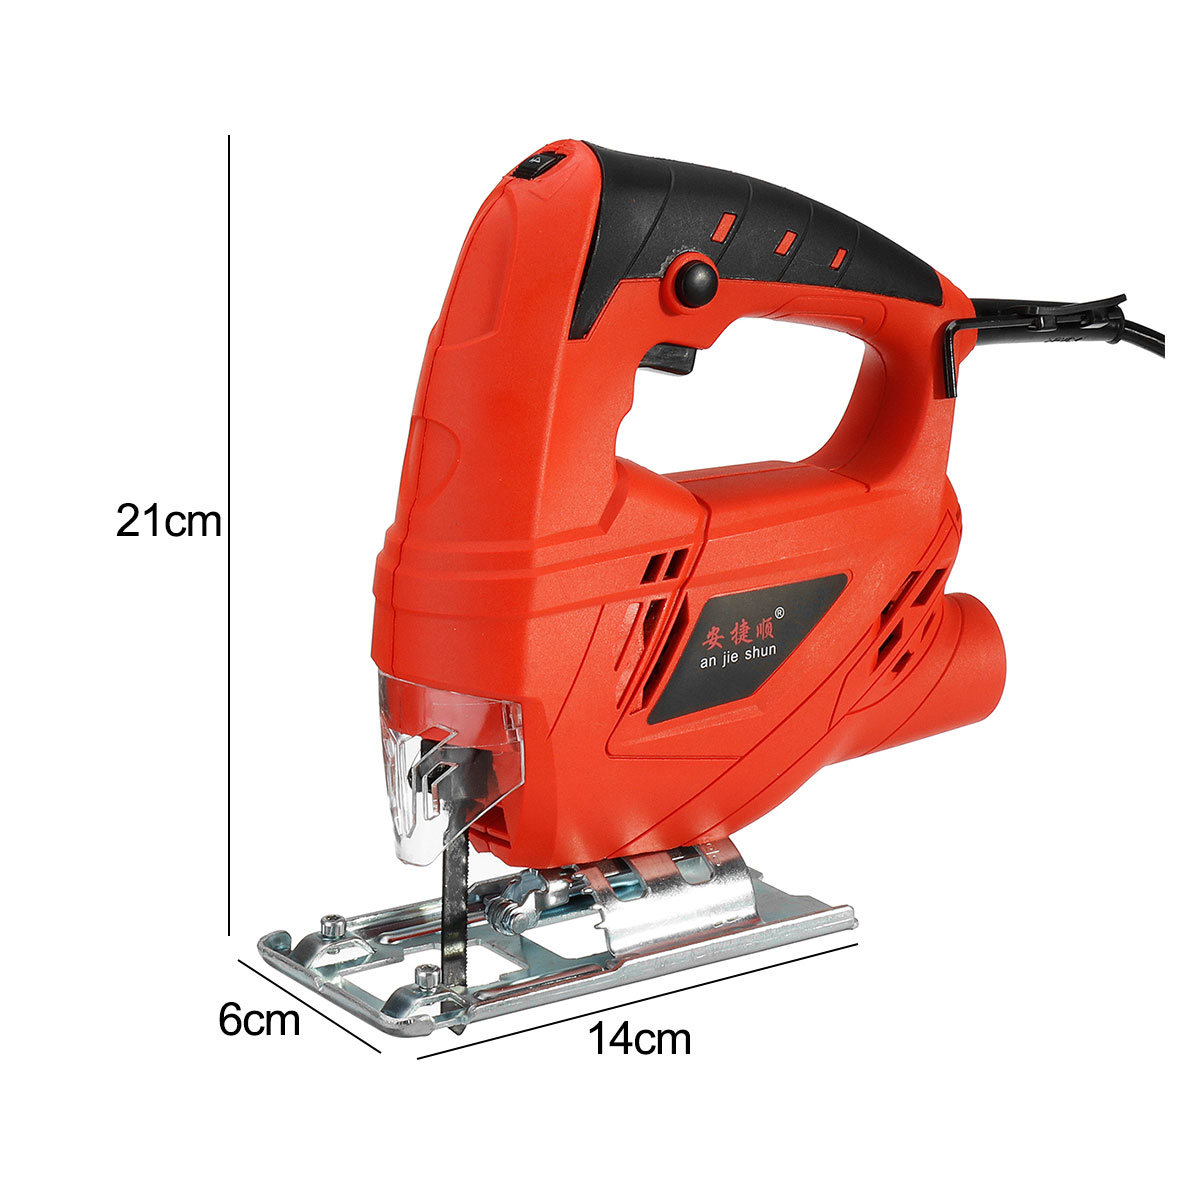 Electric-Jig-Saw-Variable-Speed-Power-Tools-Metal-Wood-Cutting-with-10-Saw-Blade-1541187-3